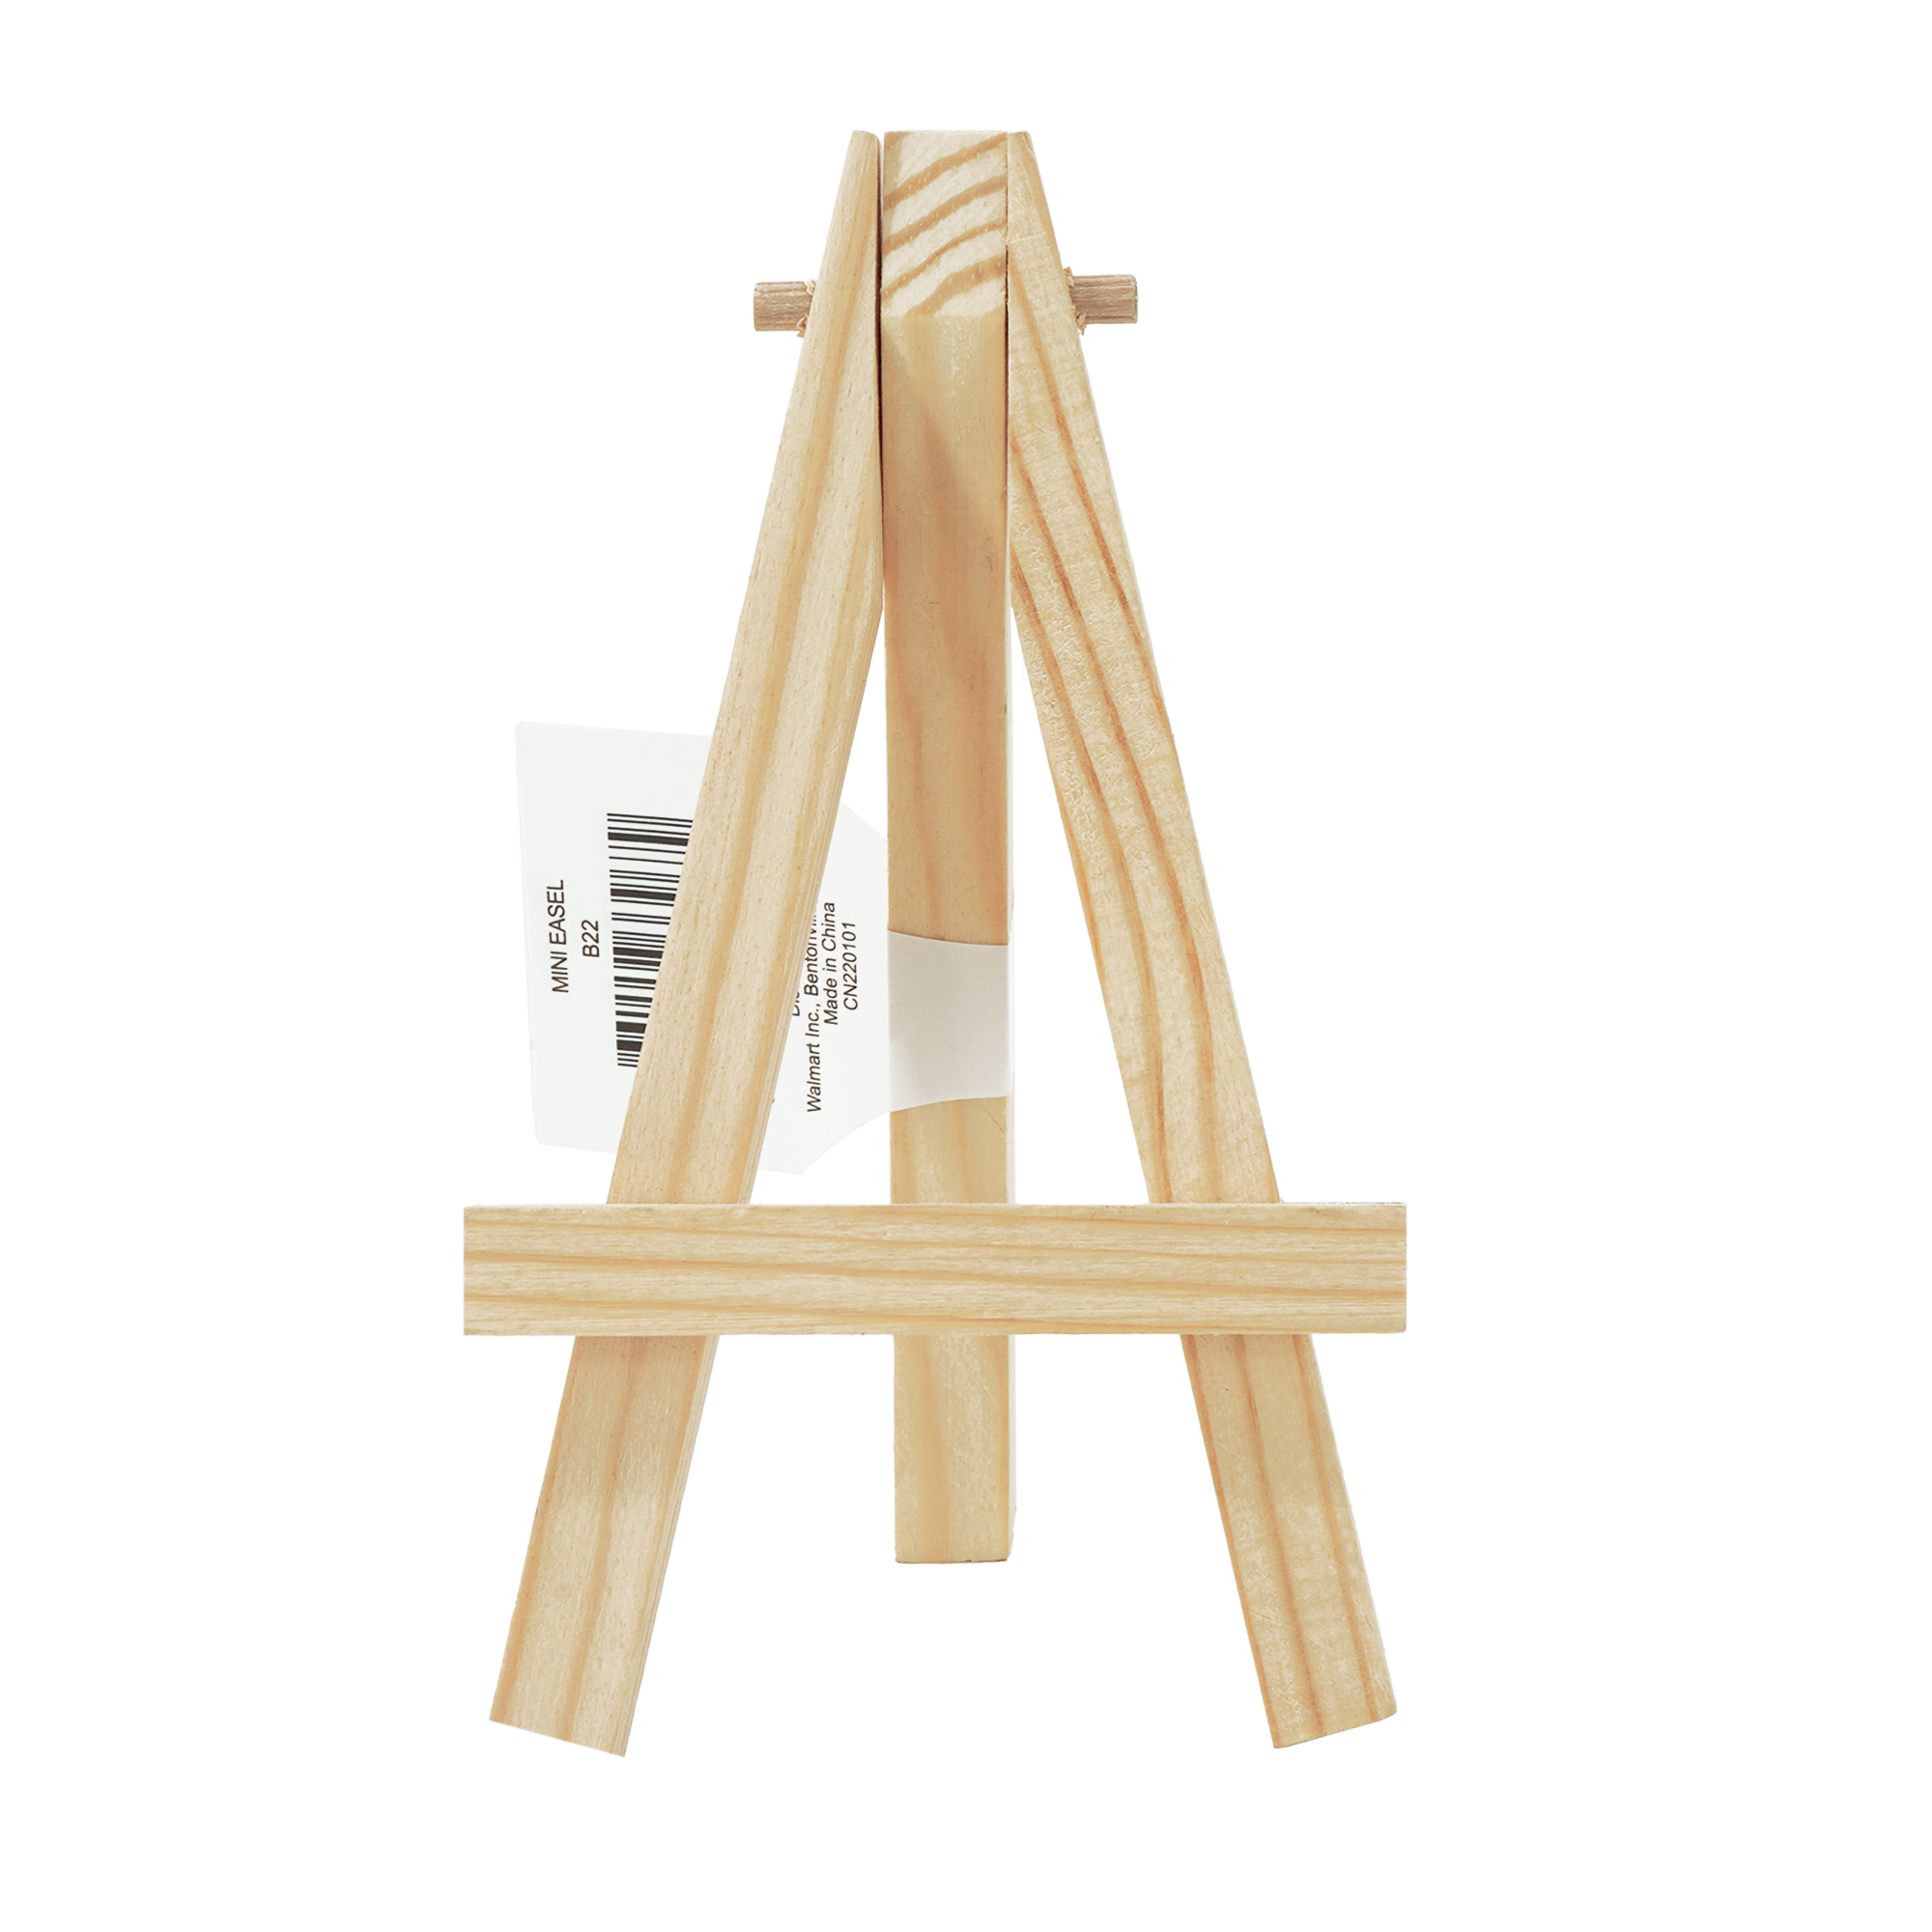 Mini Natural Wood Display Easel, Solid Pine Wood, 4.8", 1 Piece, Vendor Labelling, Great Chioce for Beginners and Hobbyists of all skill levels. - image 1 of 4